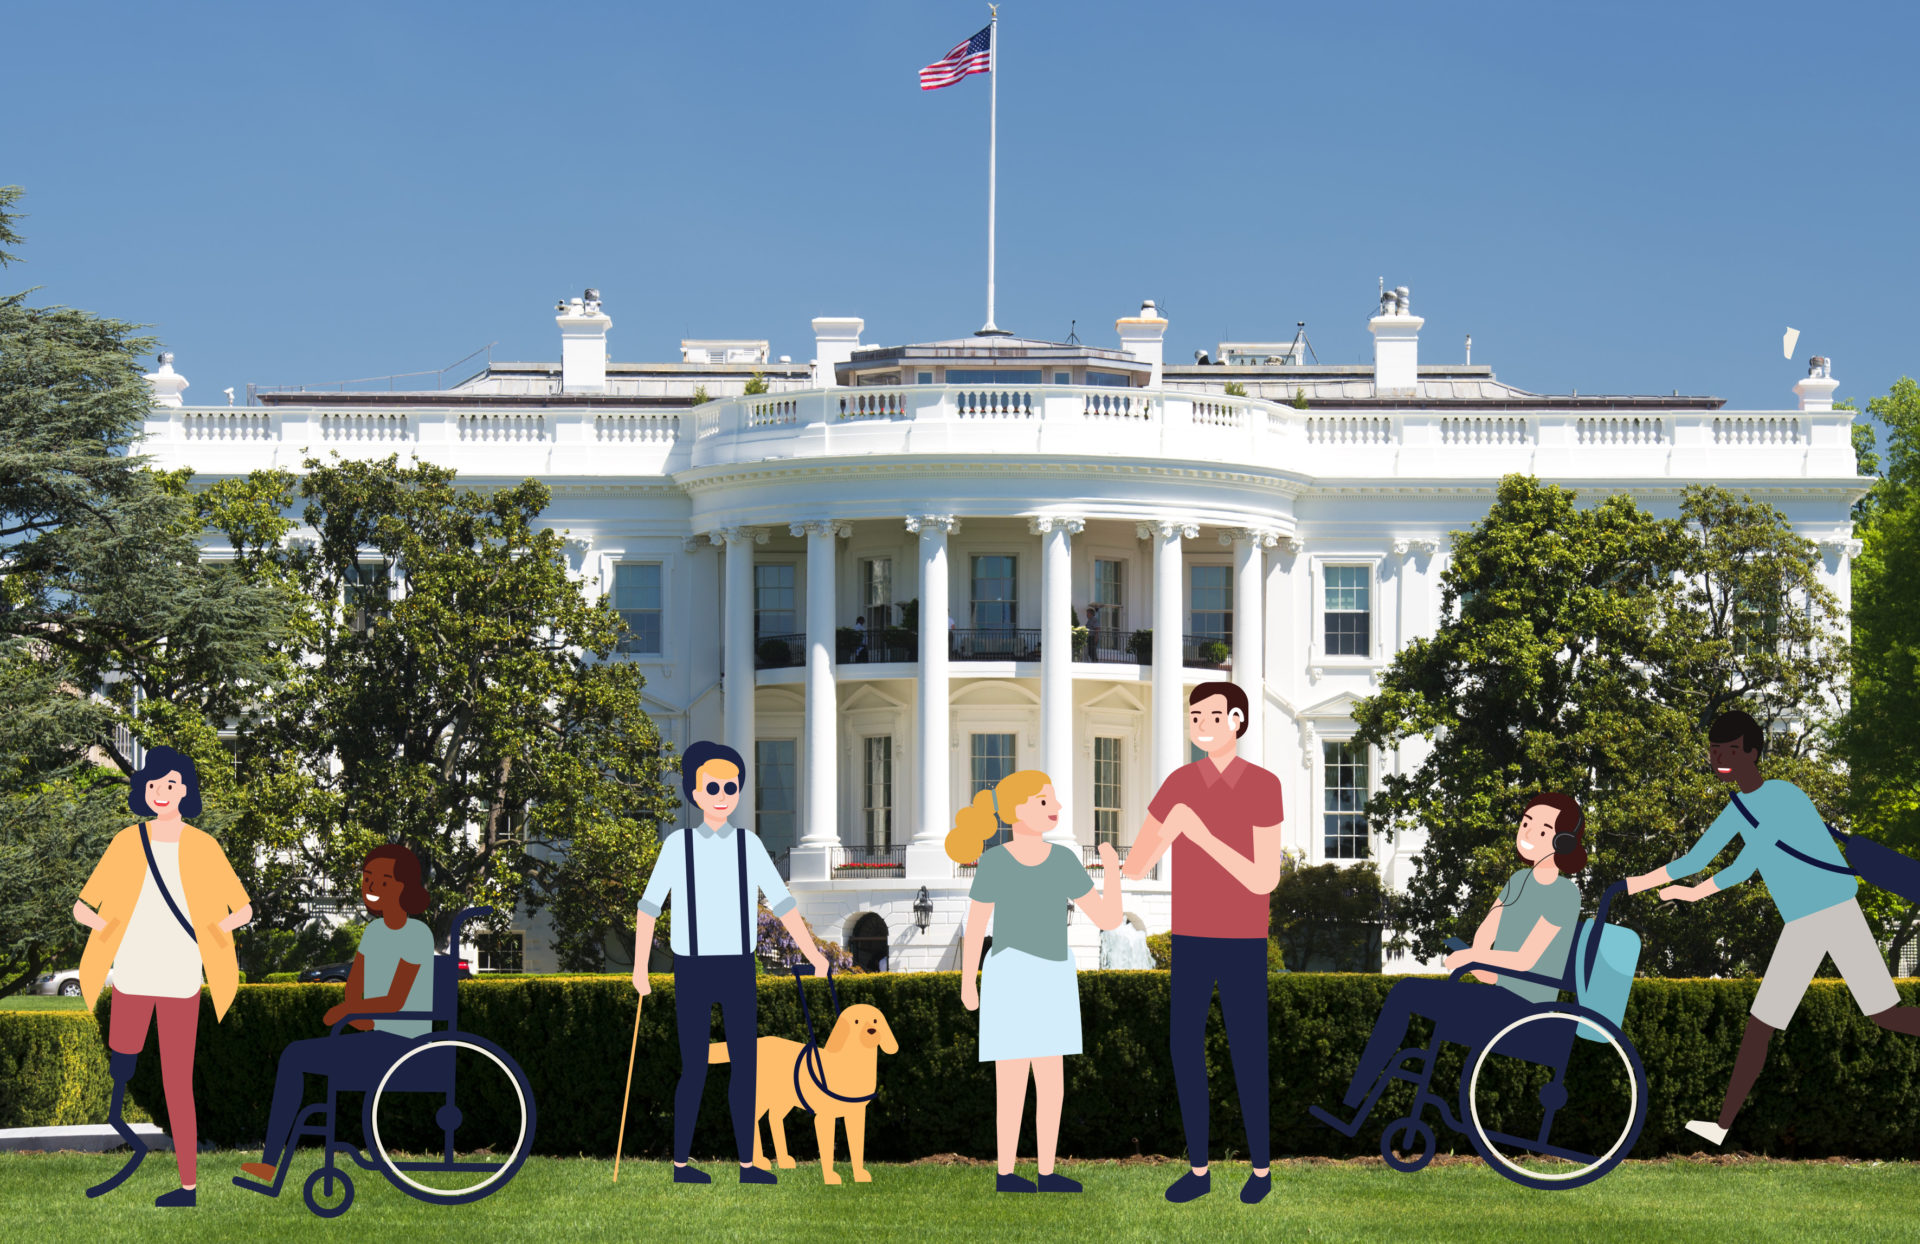 A photograph of the White House and people out the front. Some people are using wheelchairs, one has a prosthetic leg and others are chatting.